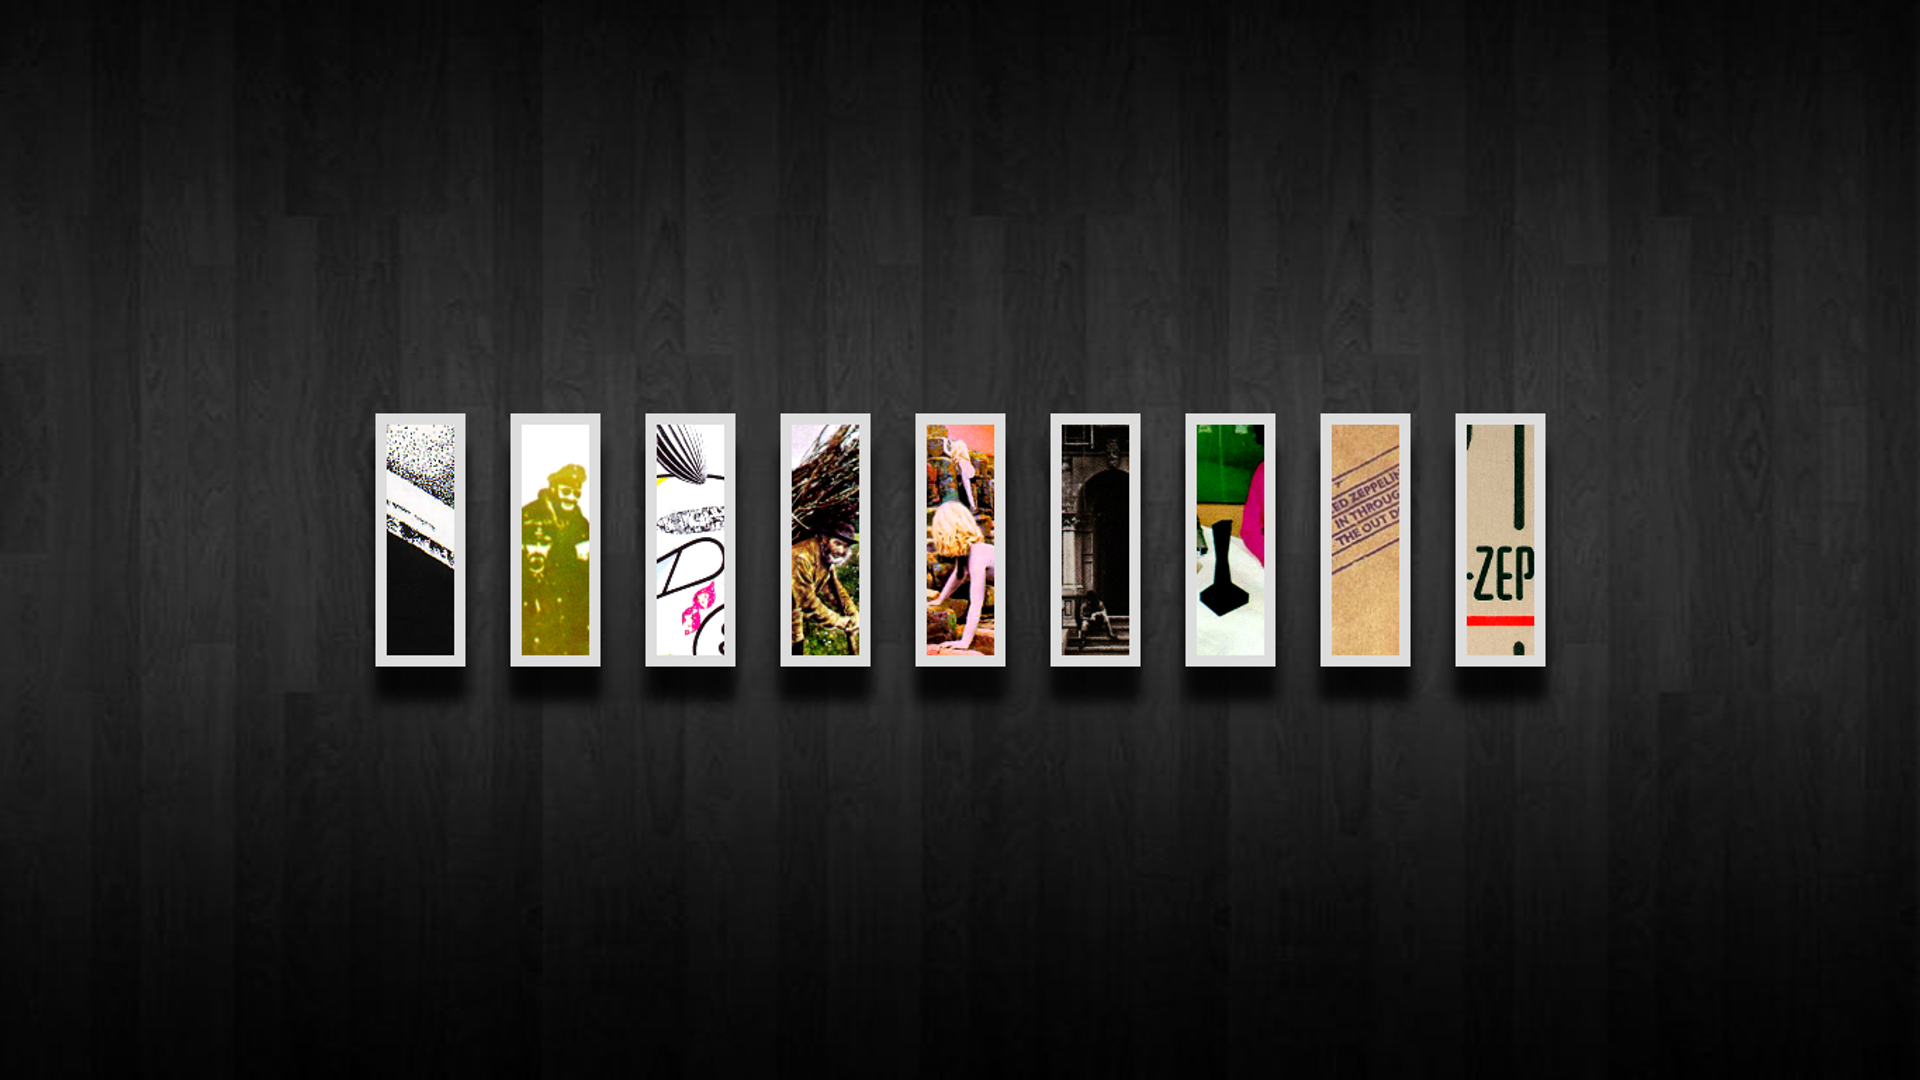 Led Zeppelin Album Covers Collage Wooden Surface 1920x1080